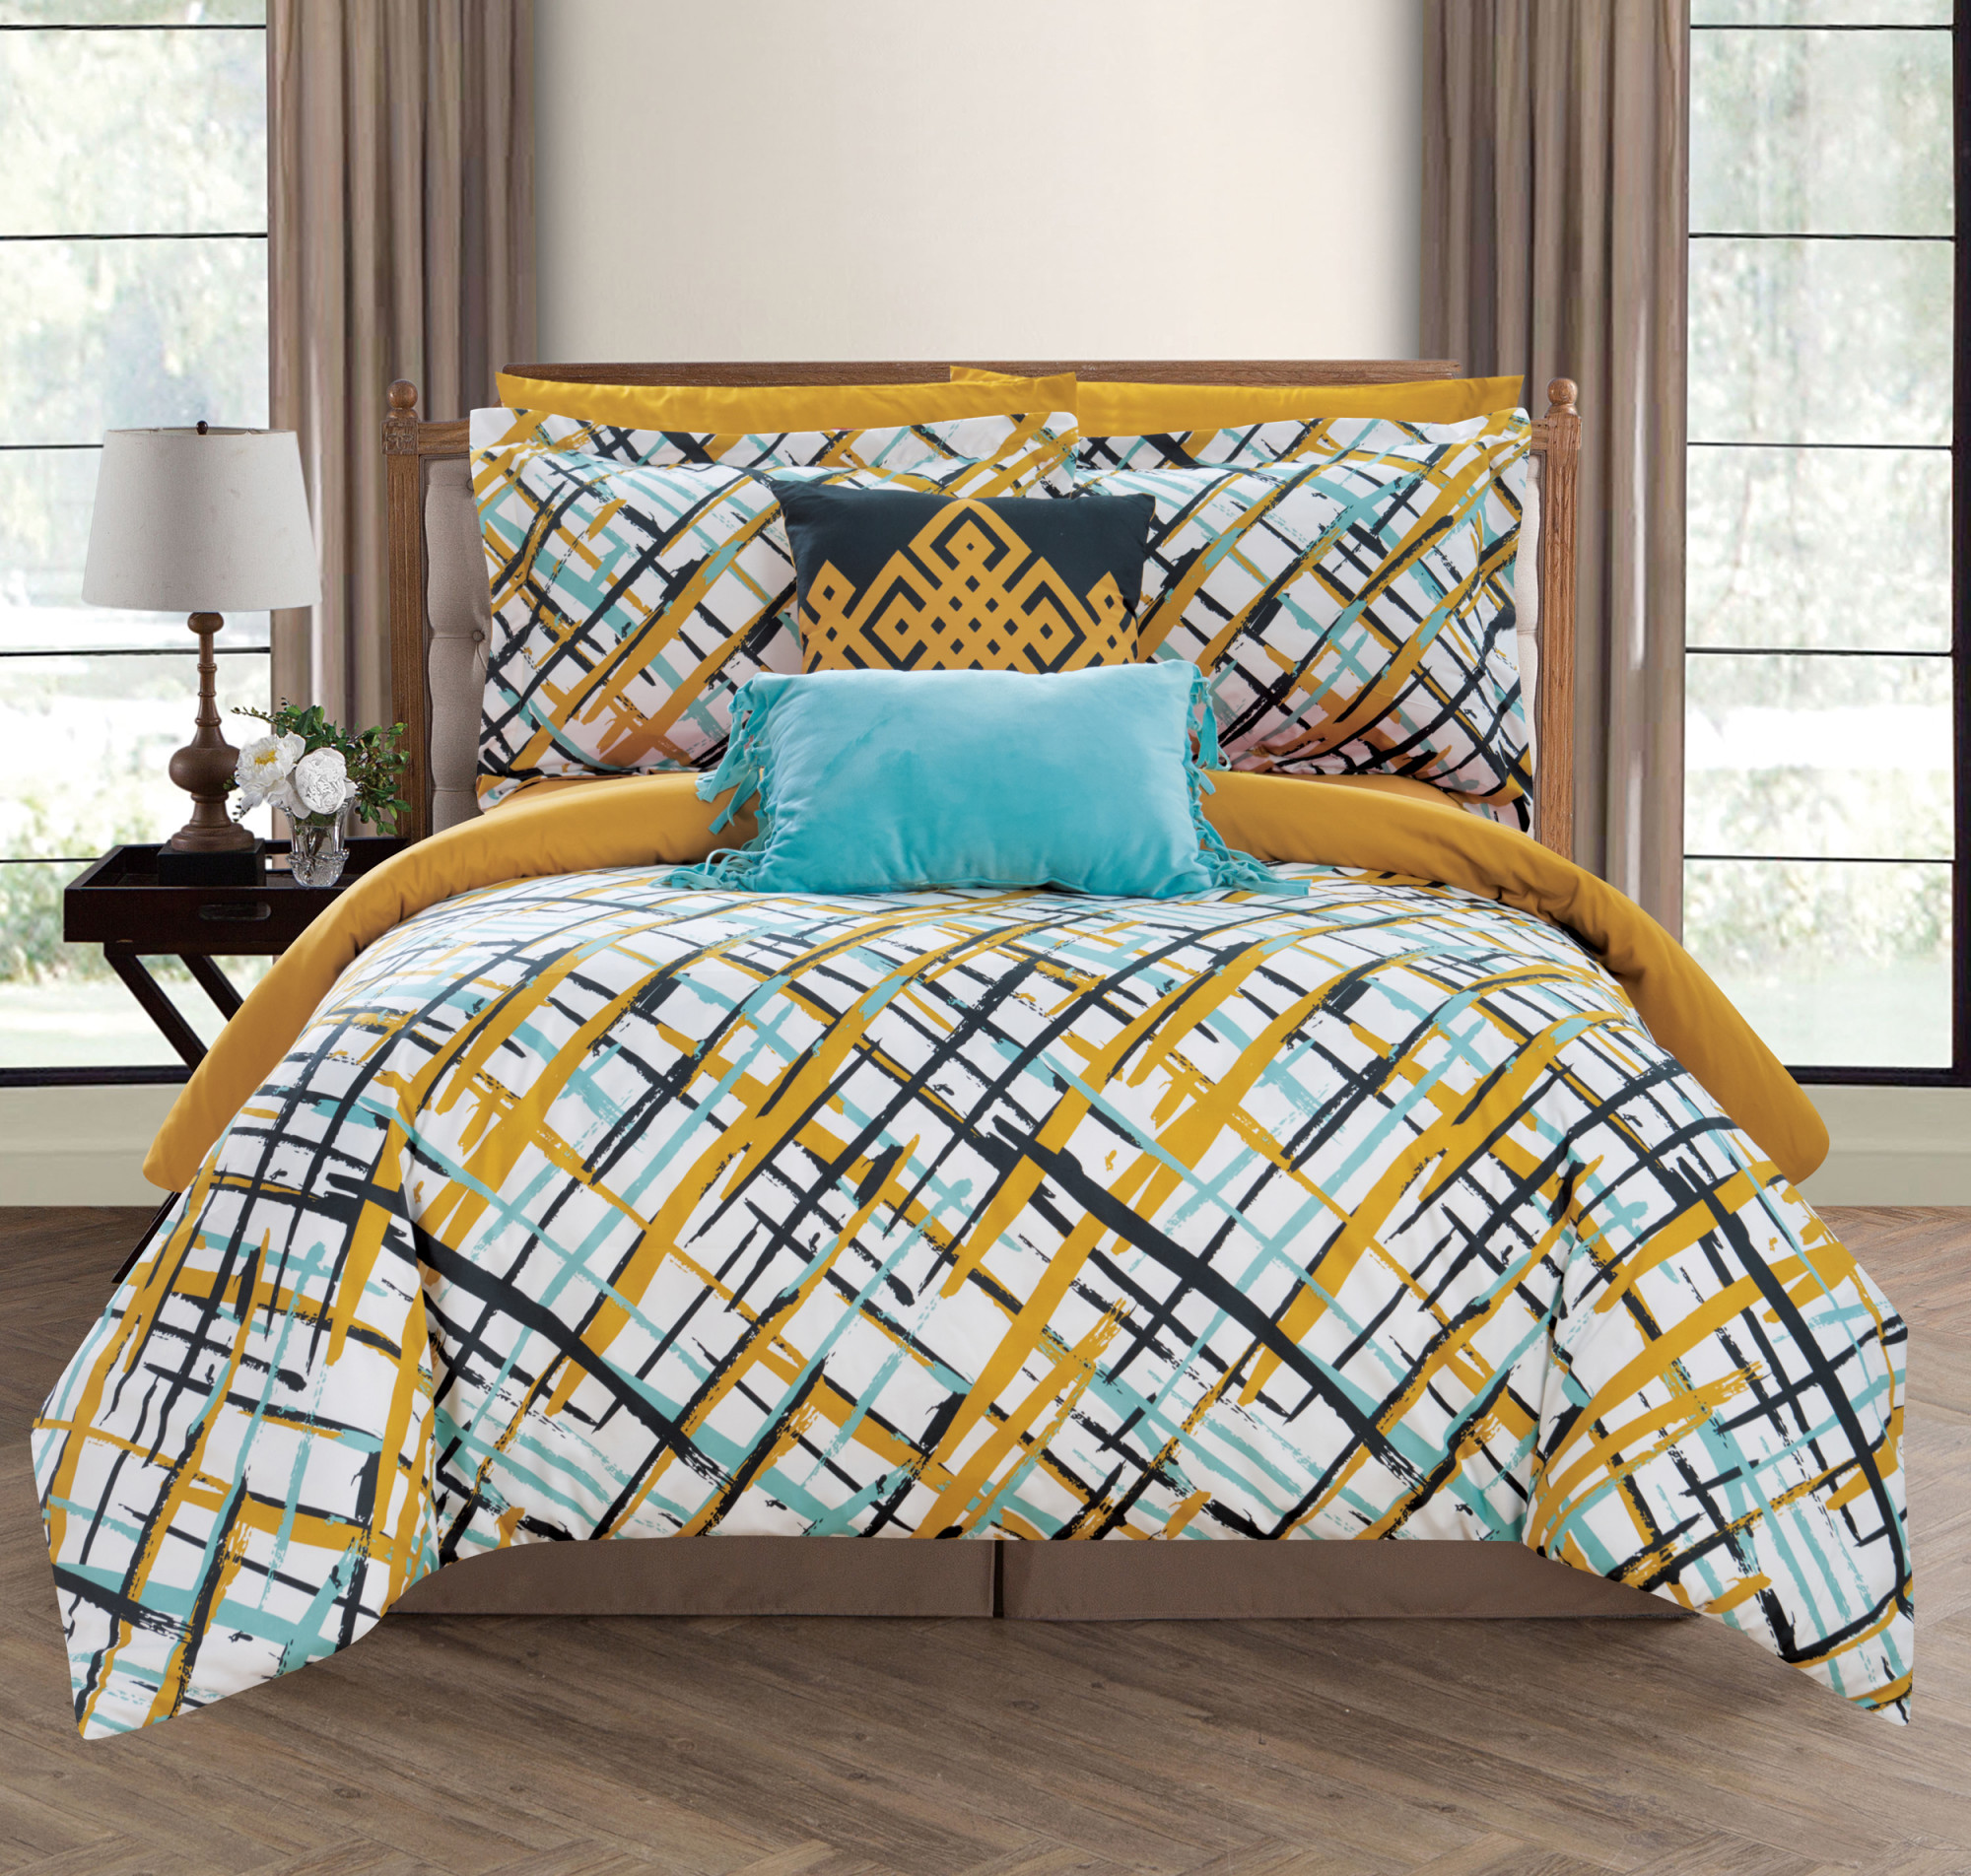 Chic Home Miro 7 or 9 Piece Reversible Bed in a Bag Comforter Set